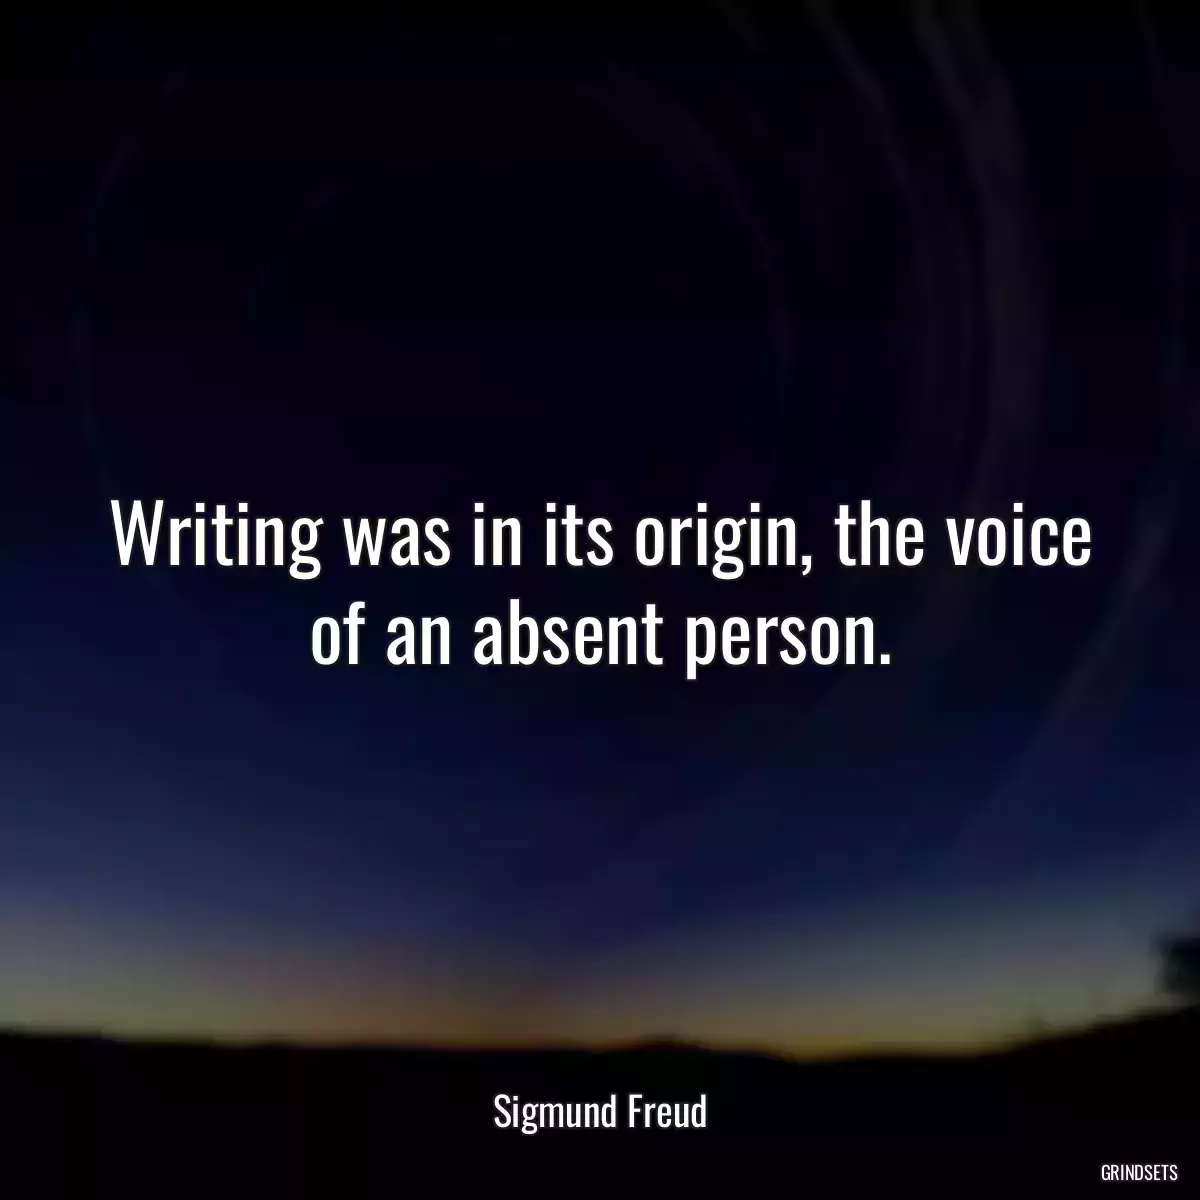 Writing was in its origin, the voice of an absent person.